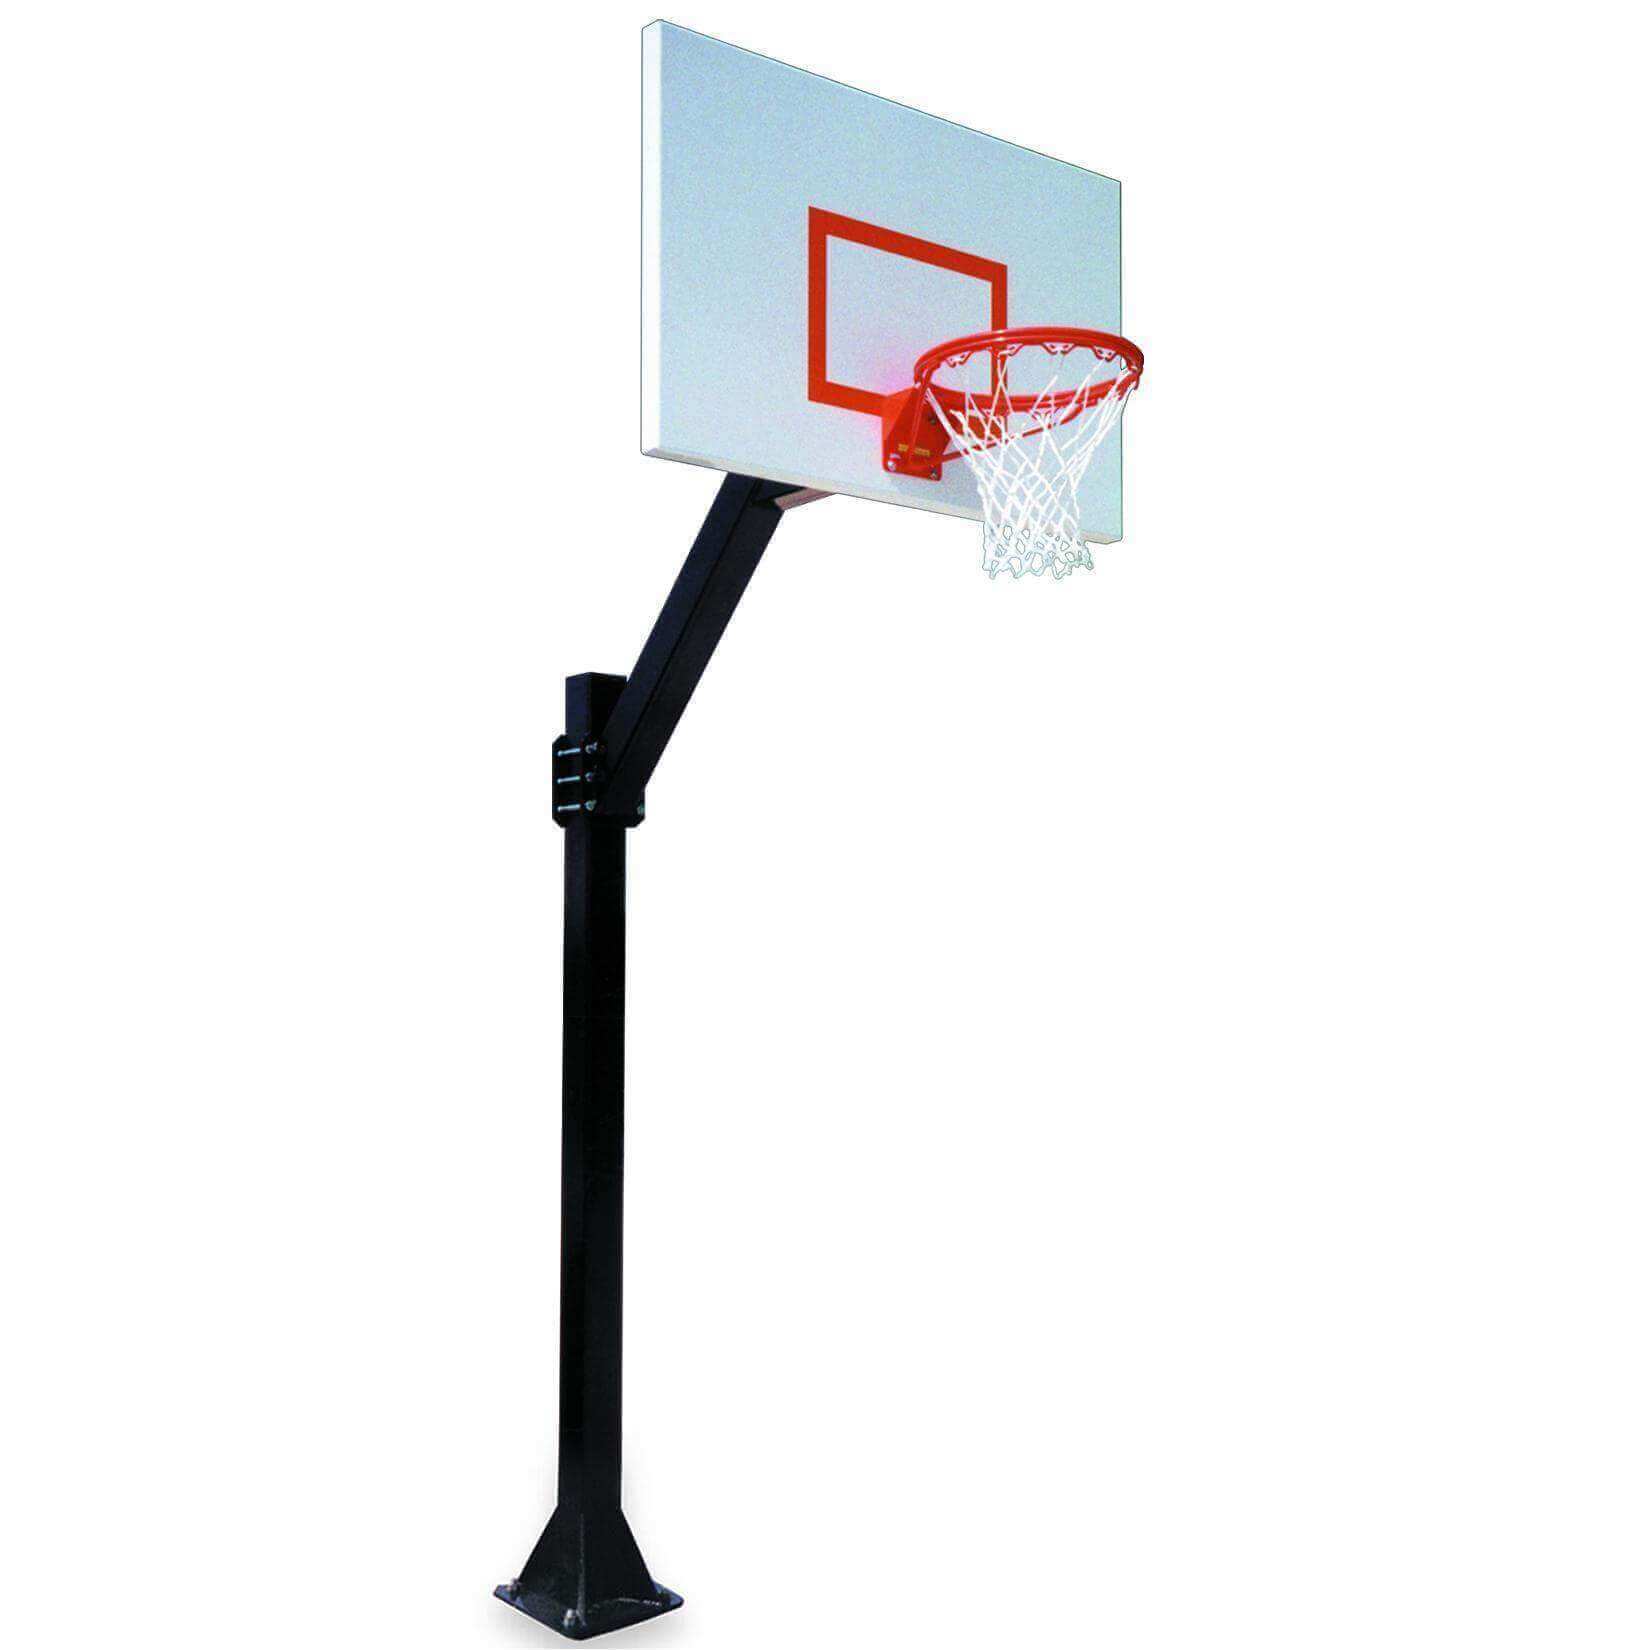 First Team Legend Jr. Series Of Fixed-Height In-Ground Hoops